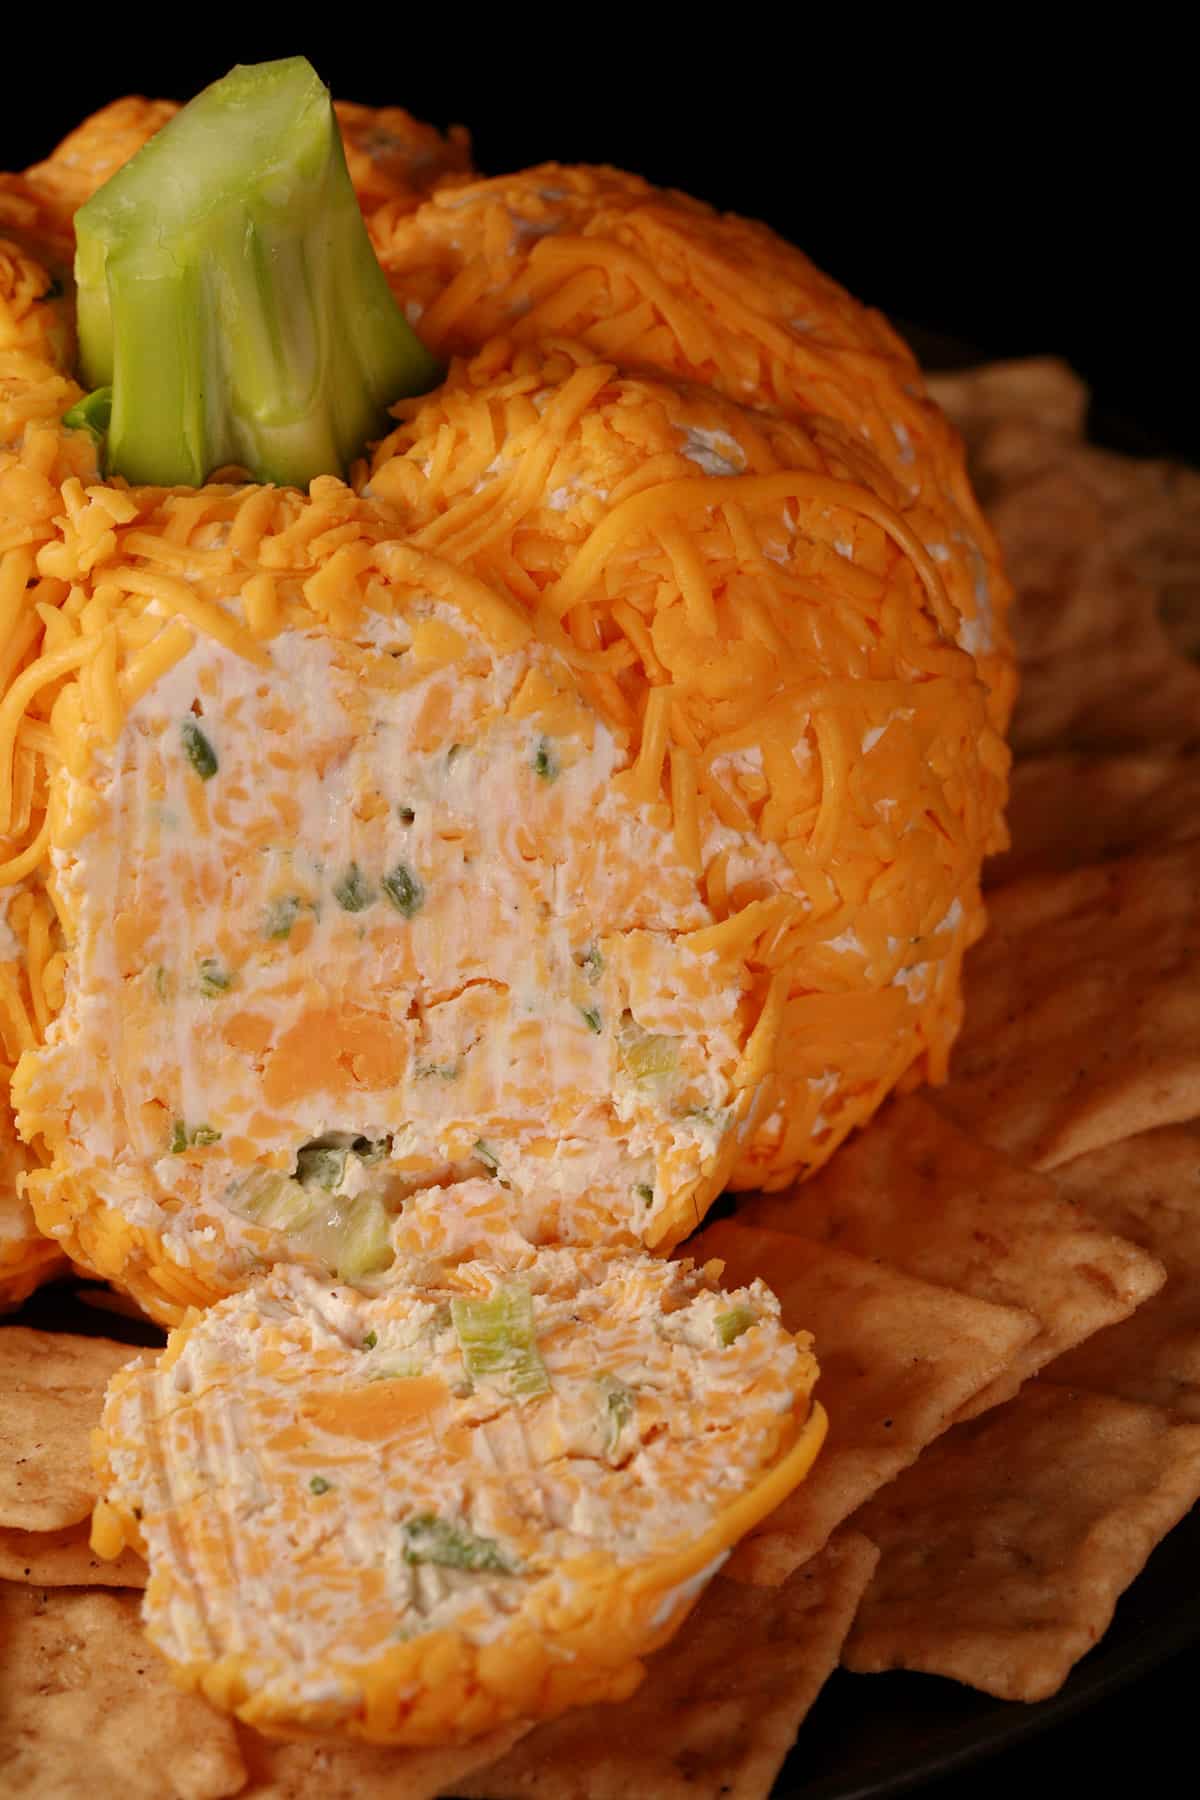 A pumpkin cheese ball with green onion visible inside.